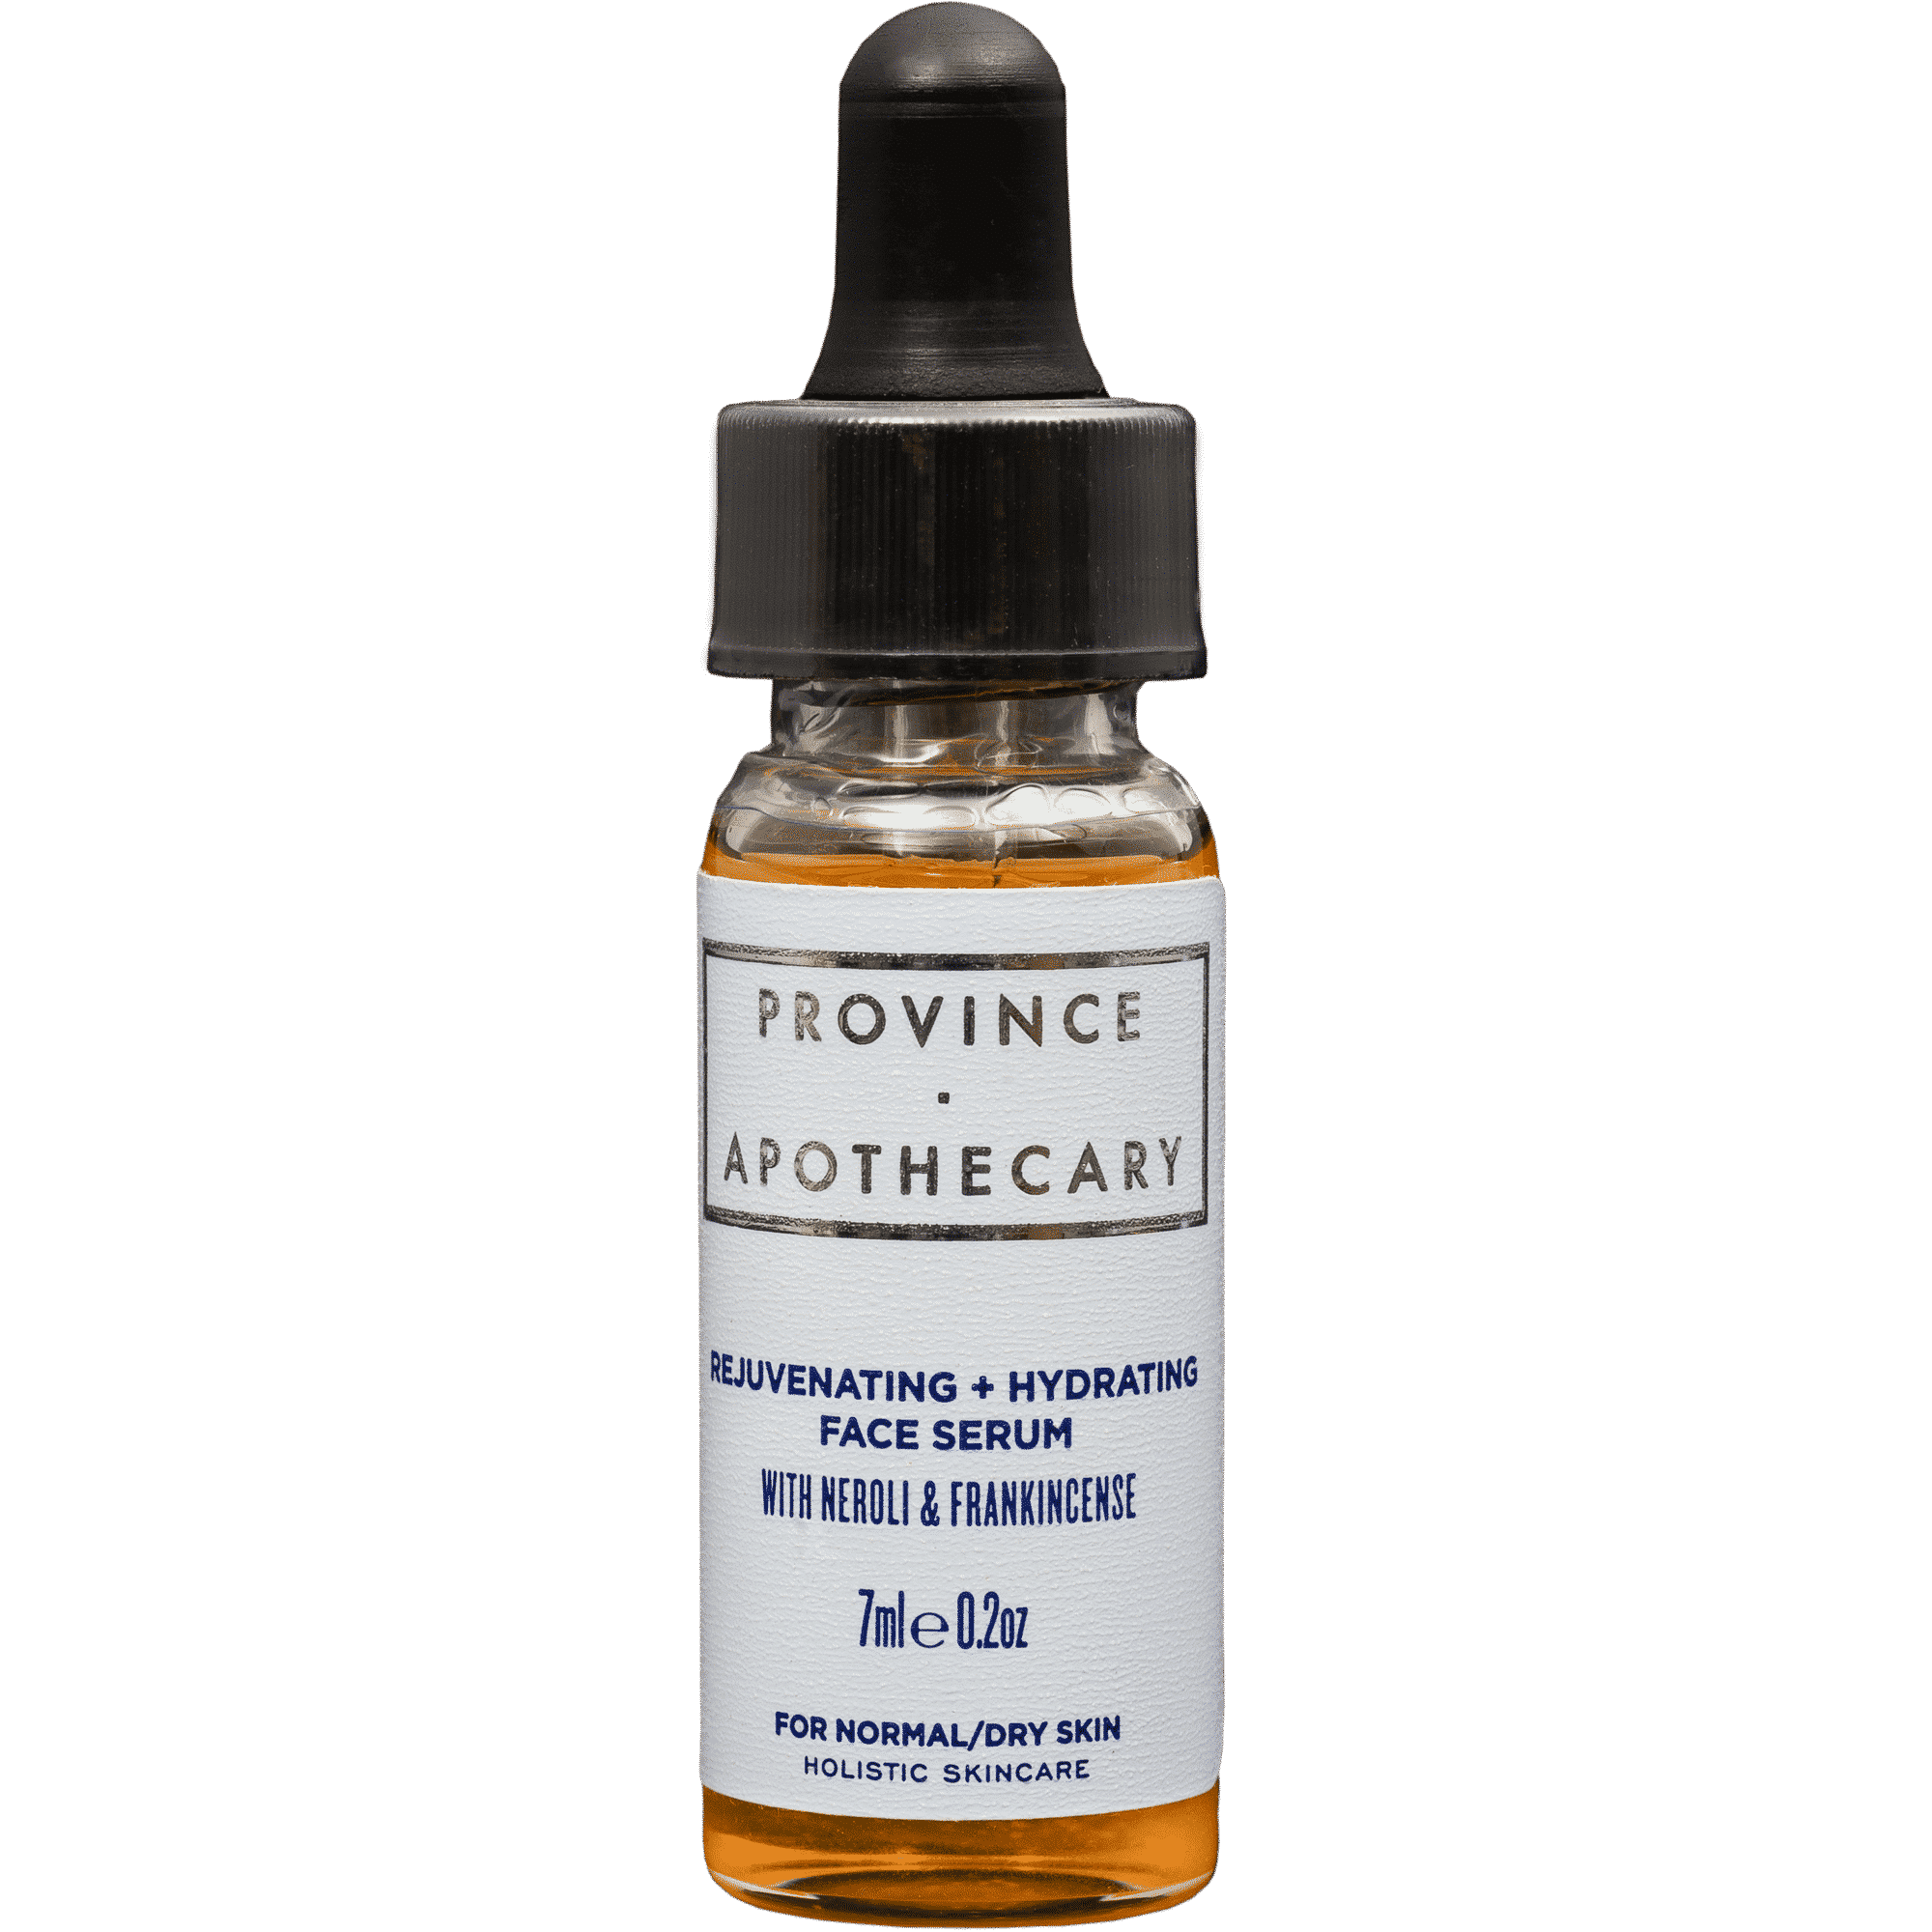 Province Apothecary Rejevunating + Hydrating Serum